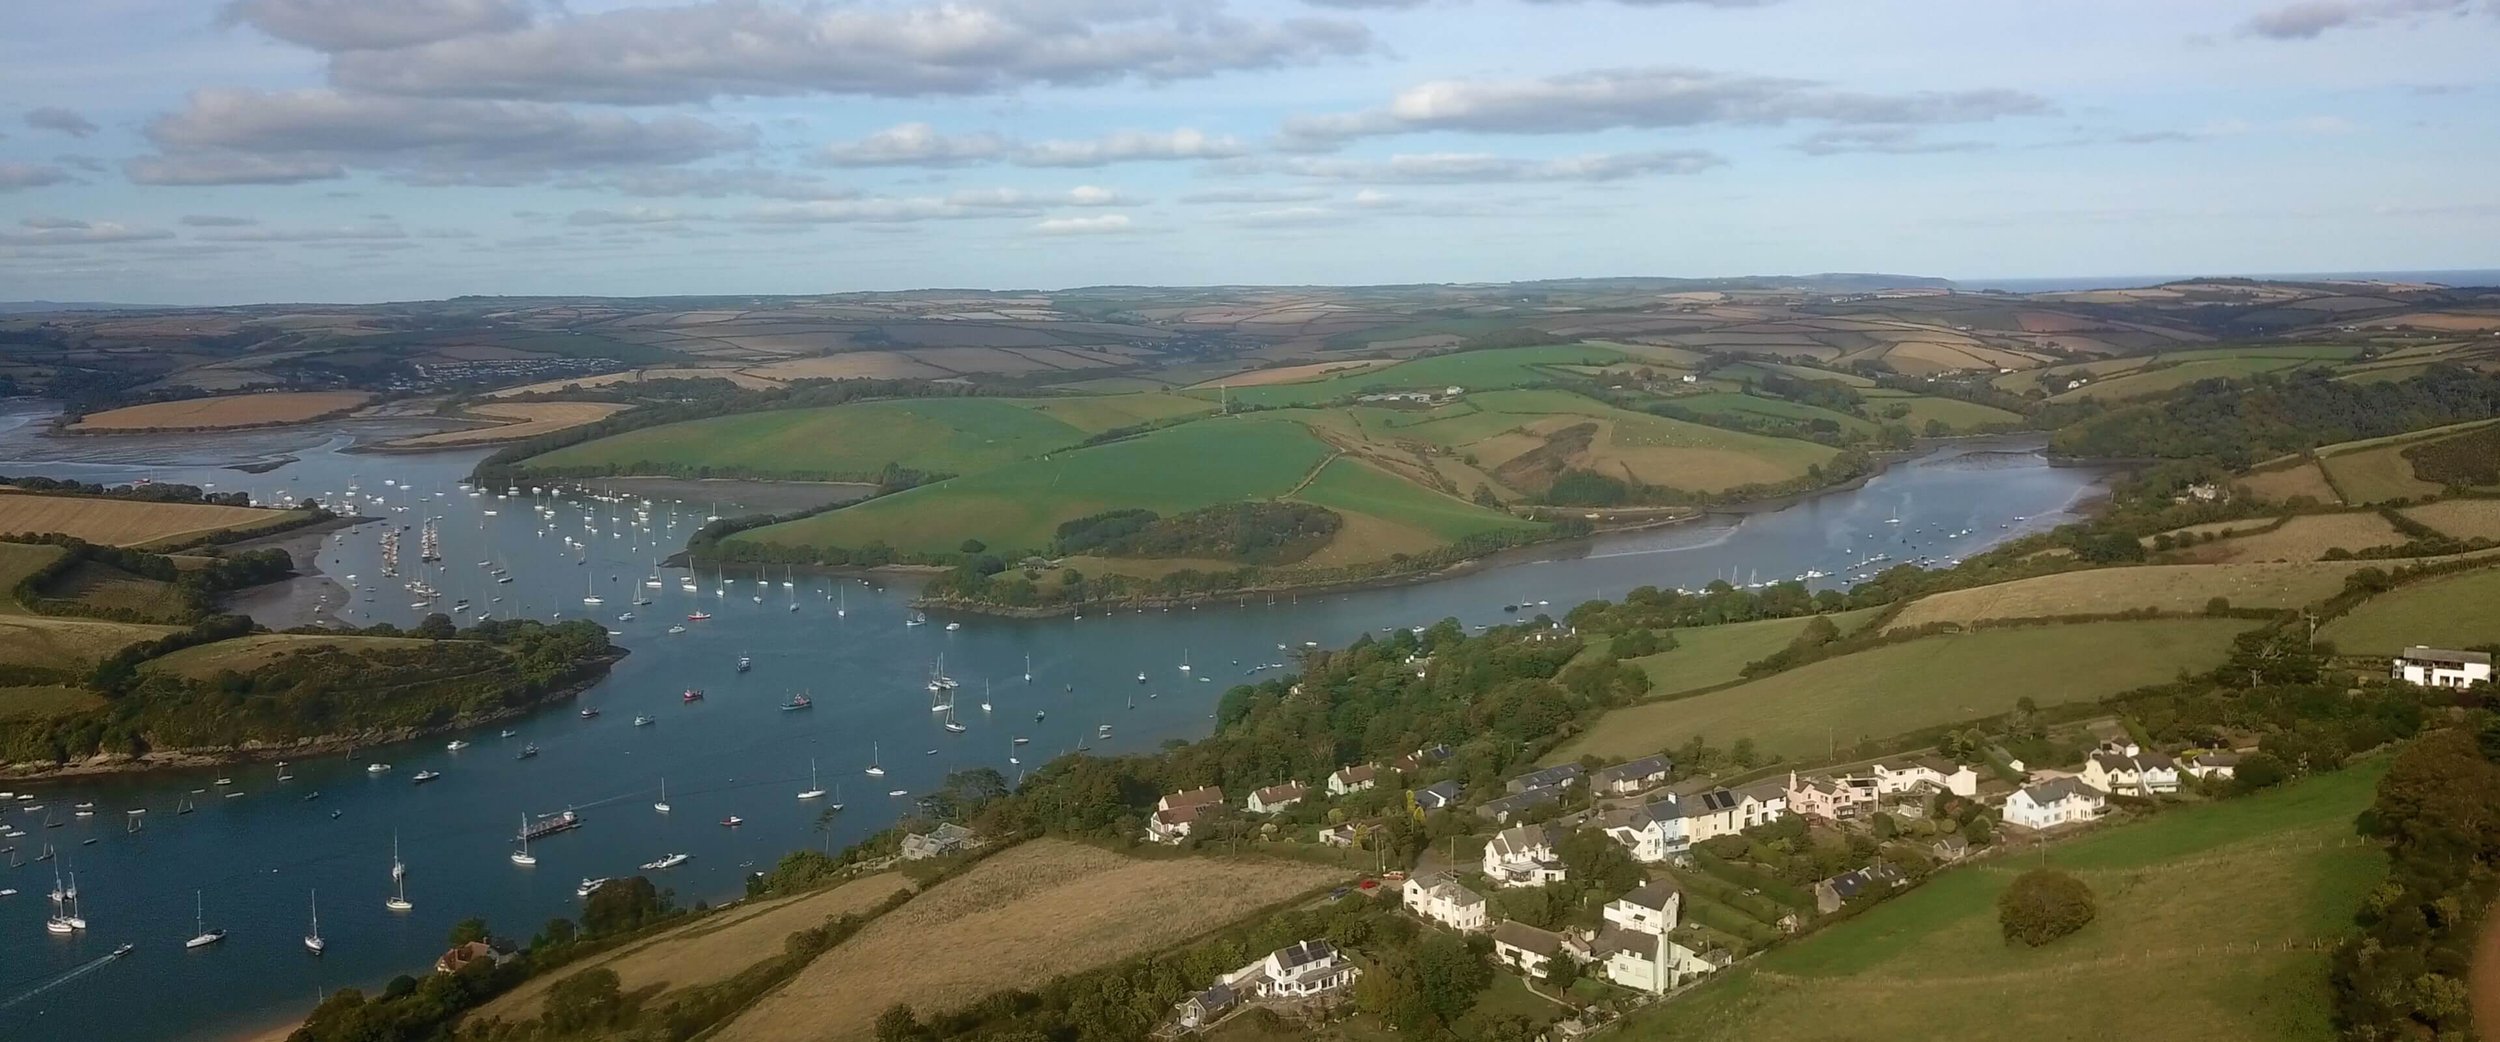 Aerial drone shot of the Salcombe Estuary showing the fields and where two rivers meet.